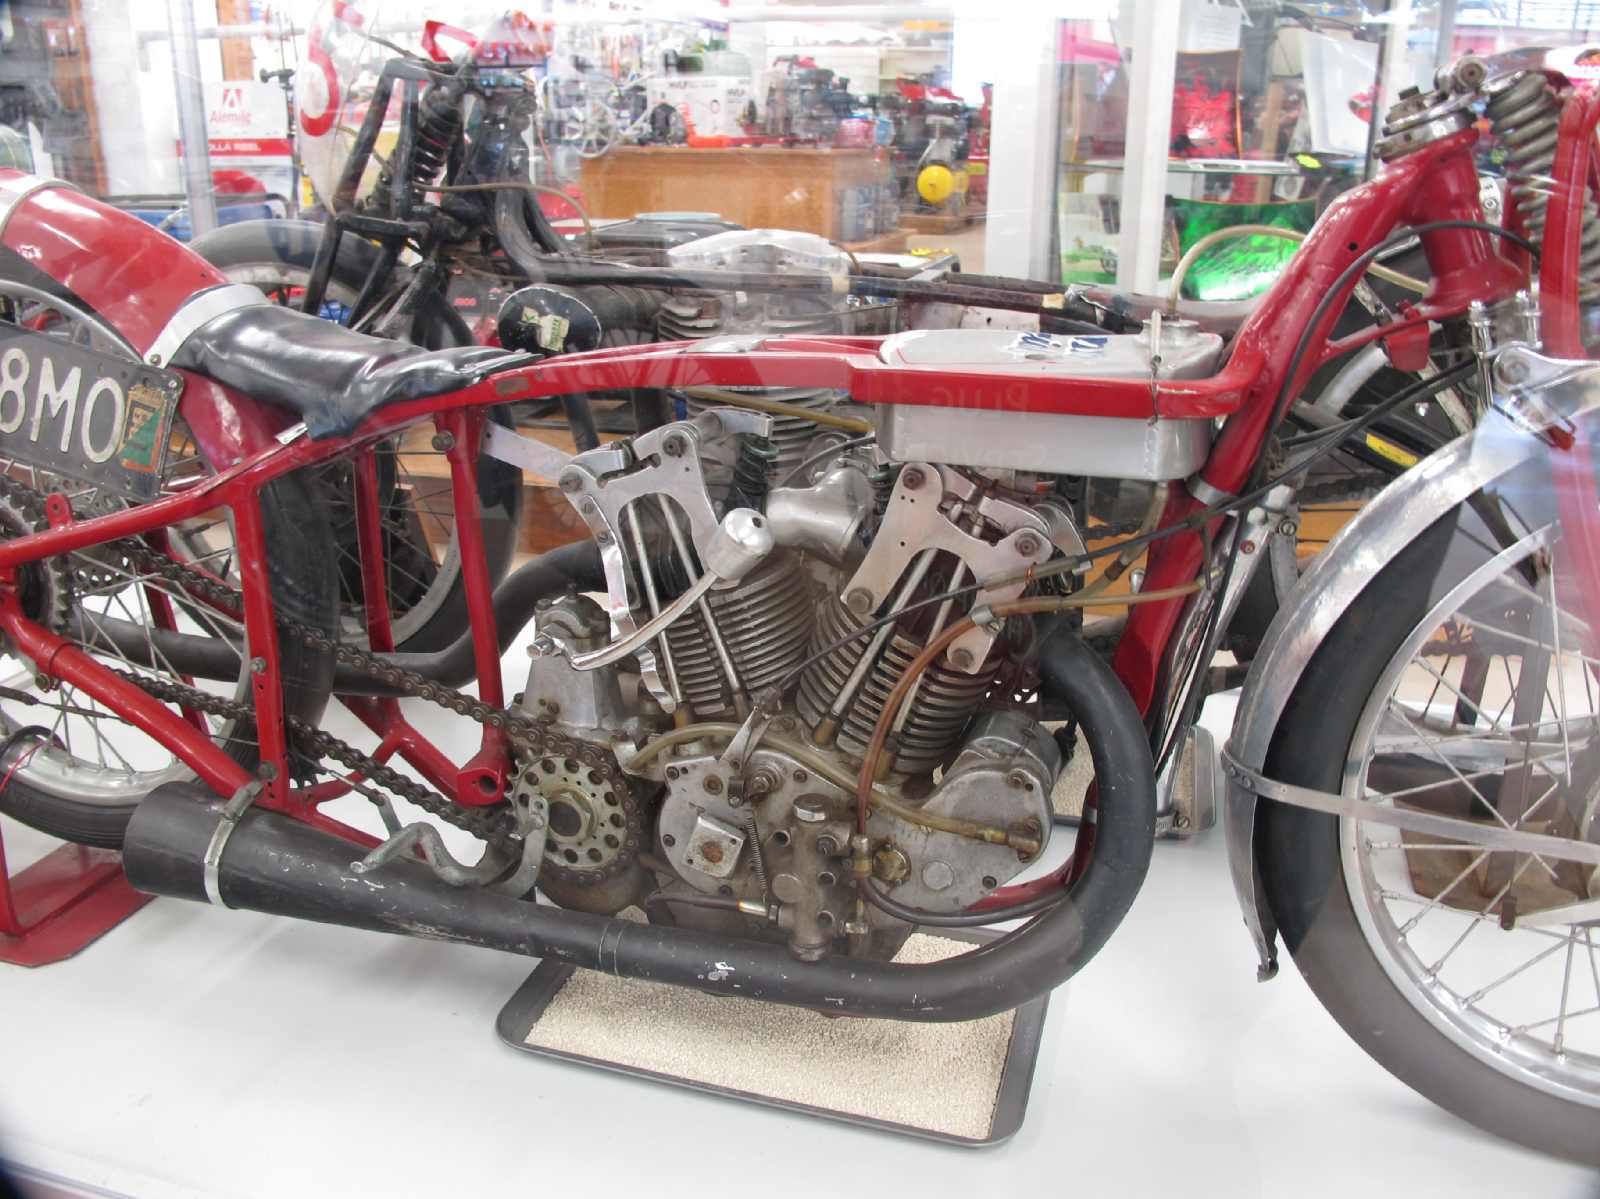 the-actual-worlds-fastest-indian-motorcycle-that-burt-munro-tinkered-with-for-nearly-50-years-then-set-speed-records-at-bonneville-usa.jpg